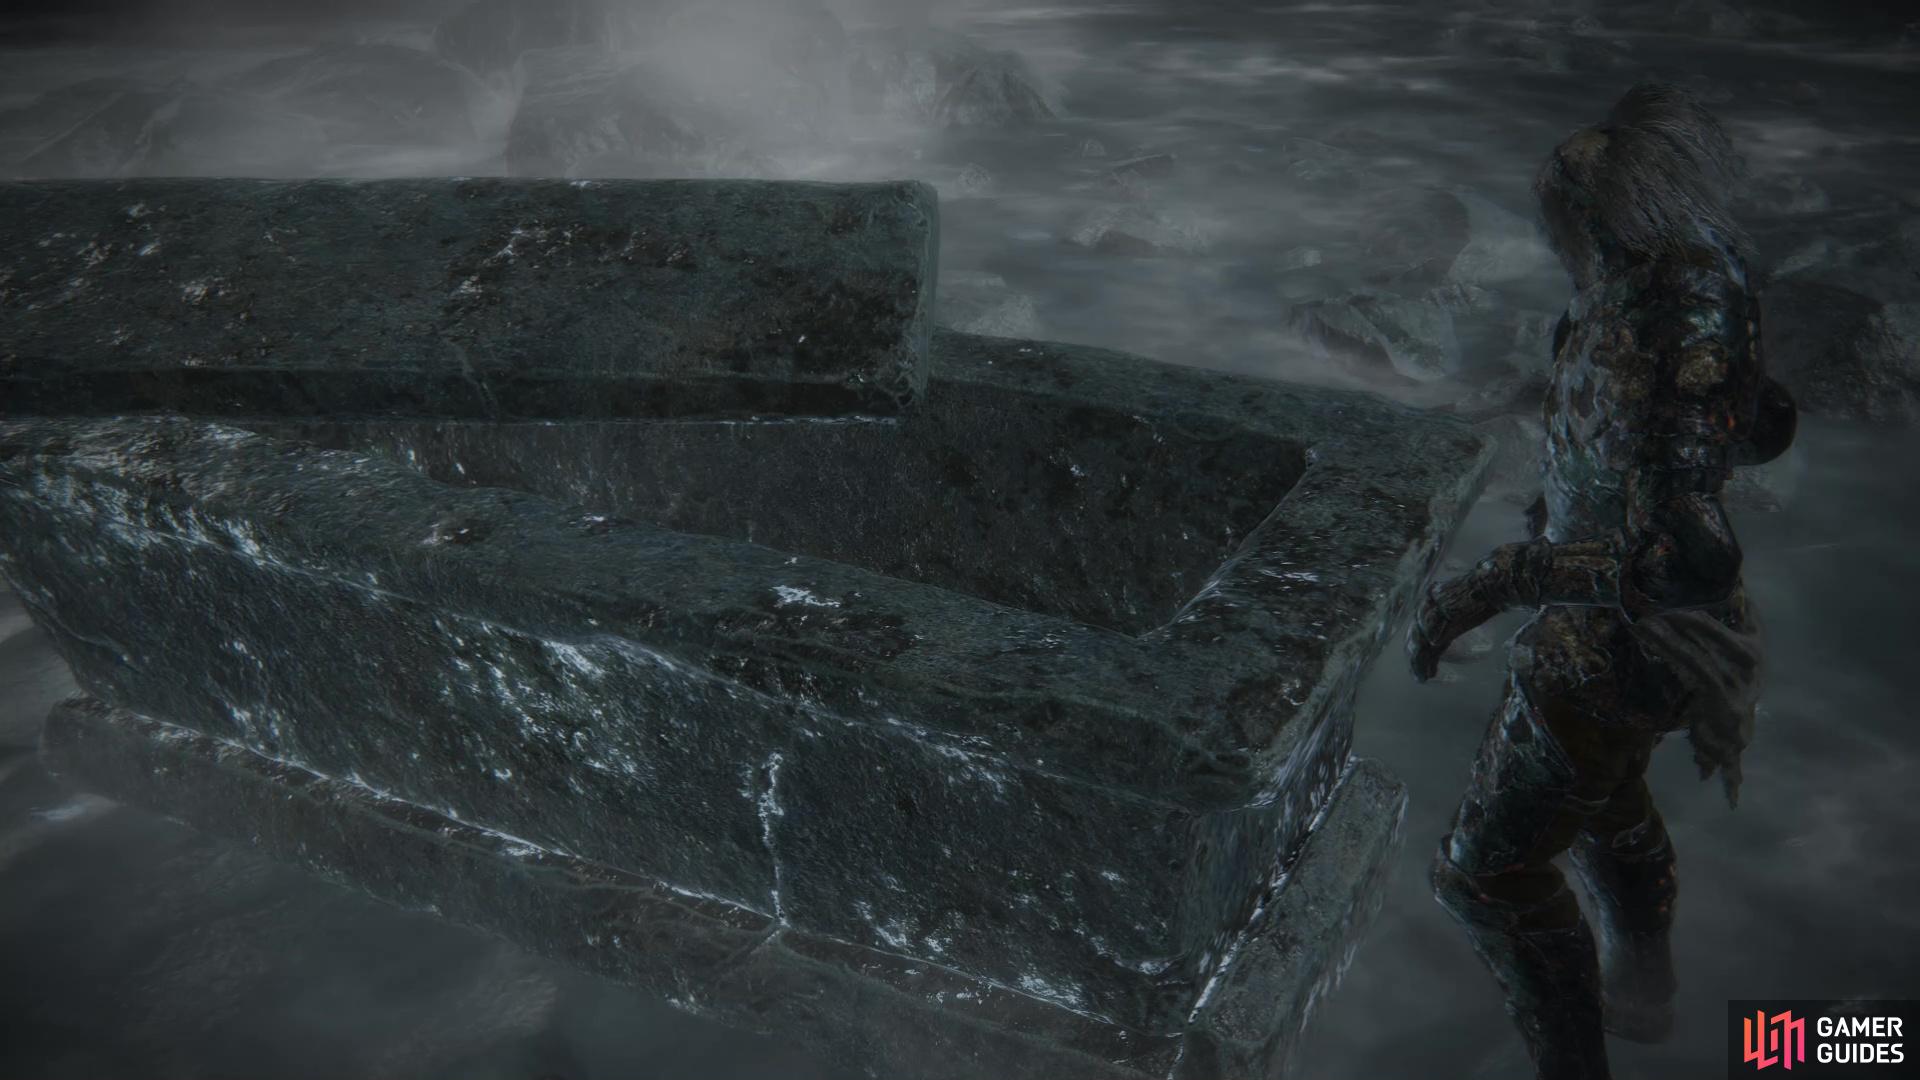 Enter into the stone coffin to teleport to Deeproot Depths.